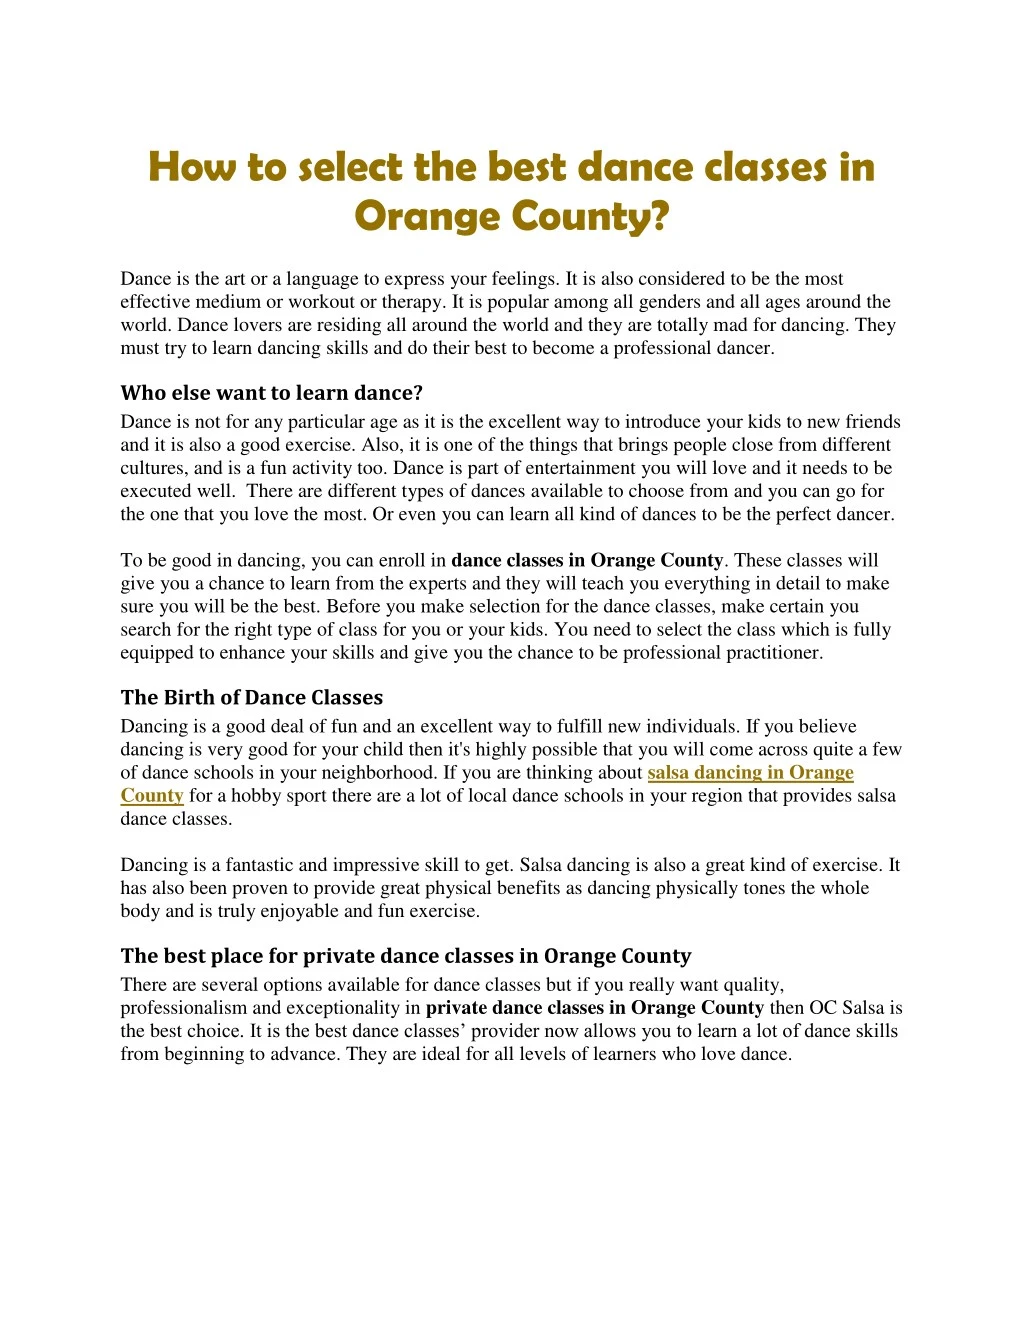 how to select the best dance classes in orange